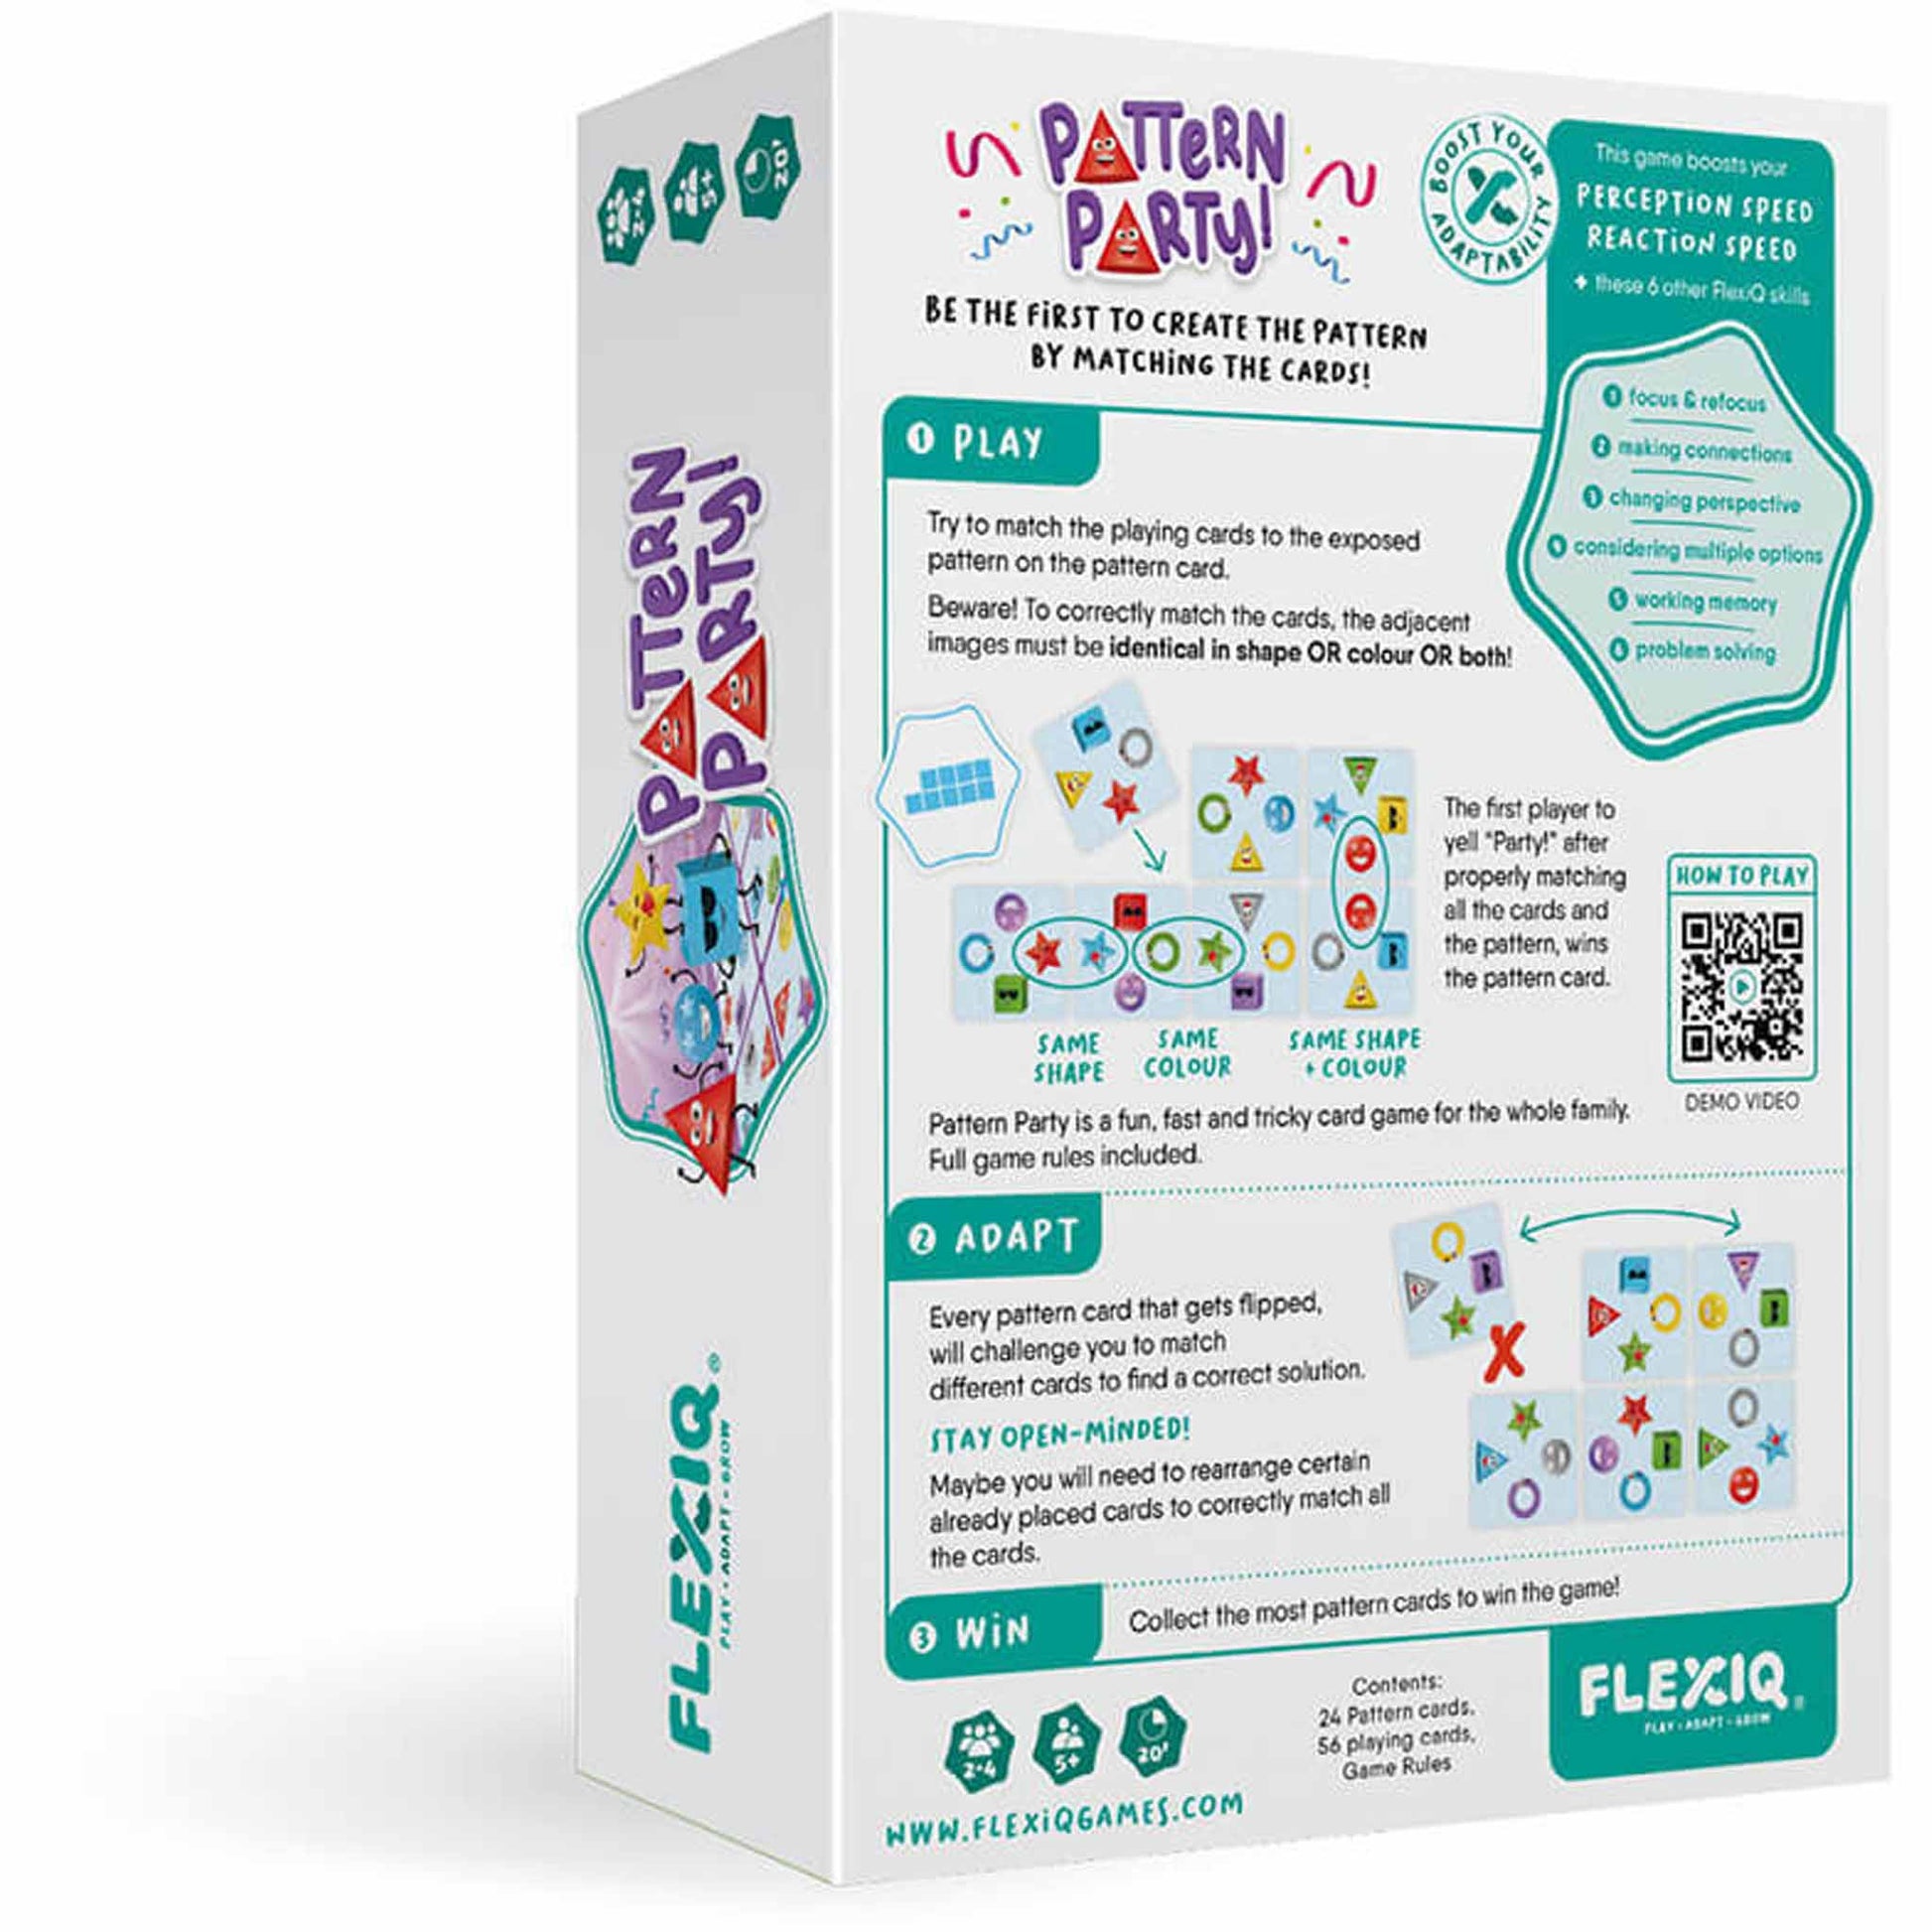 Photo of back of box of Pattern Party reaction speed game by FLEXIQ.